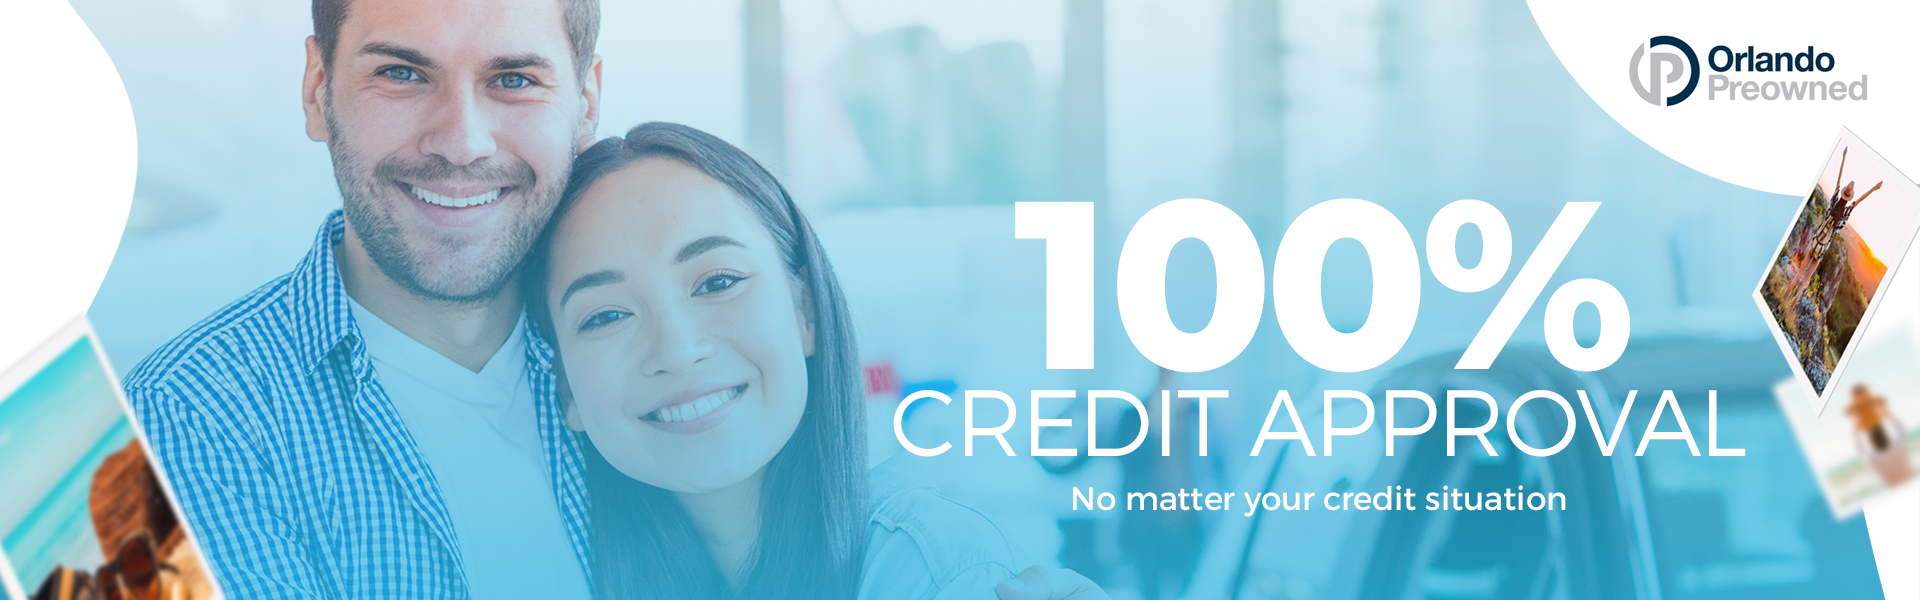 100% Credit Approval for all clients at Orlando Pre-Owned